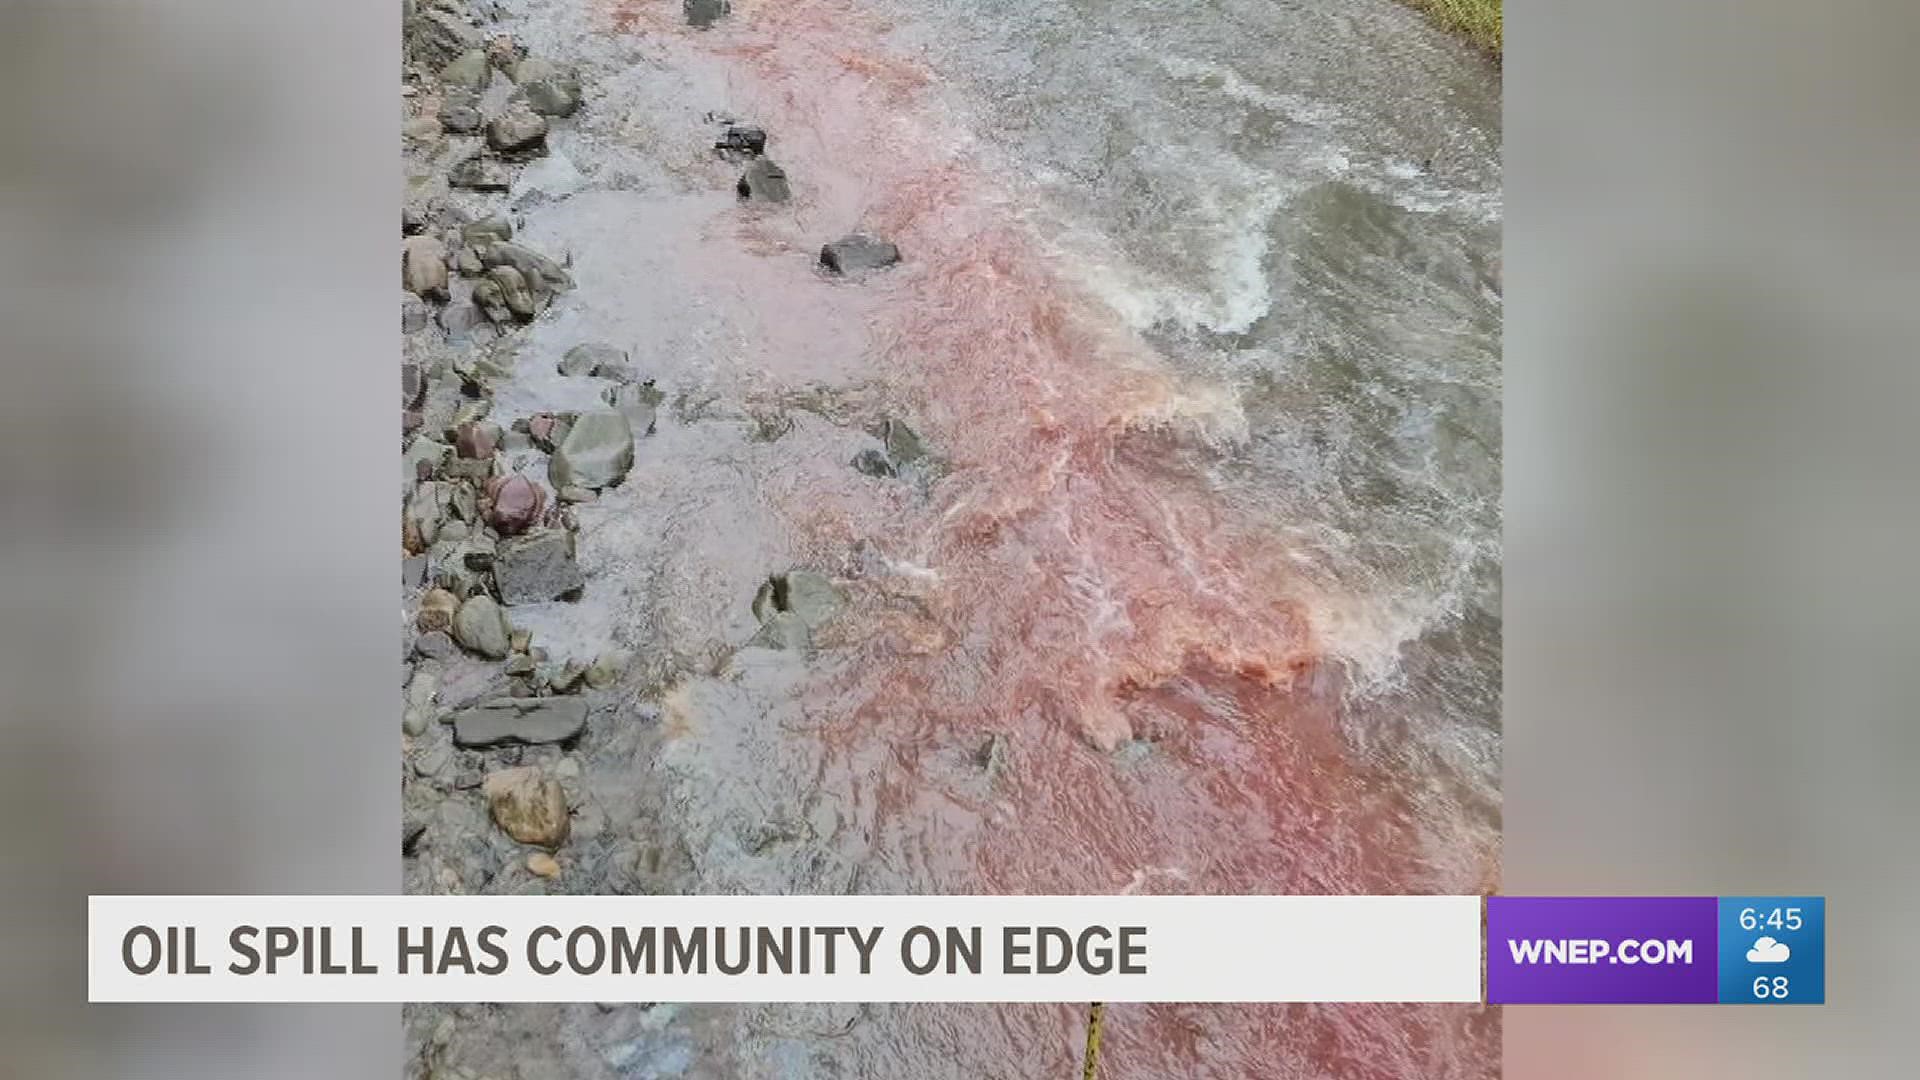 Newswatch 16's Courtney Harrison spoke to area officials and neighbors who are worried about the spill's lasting effects on the environment.